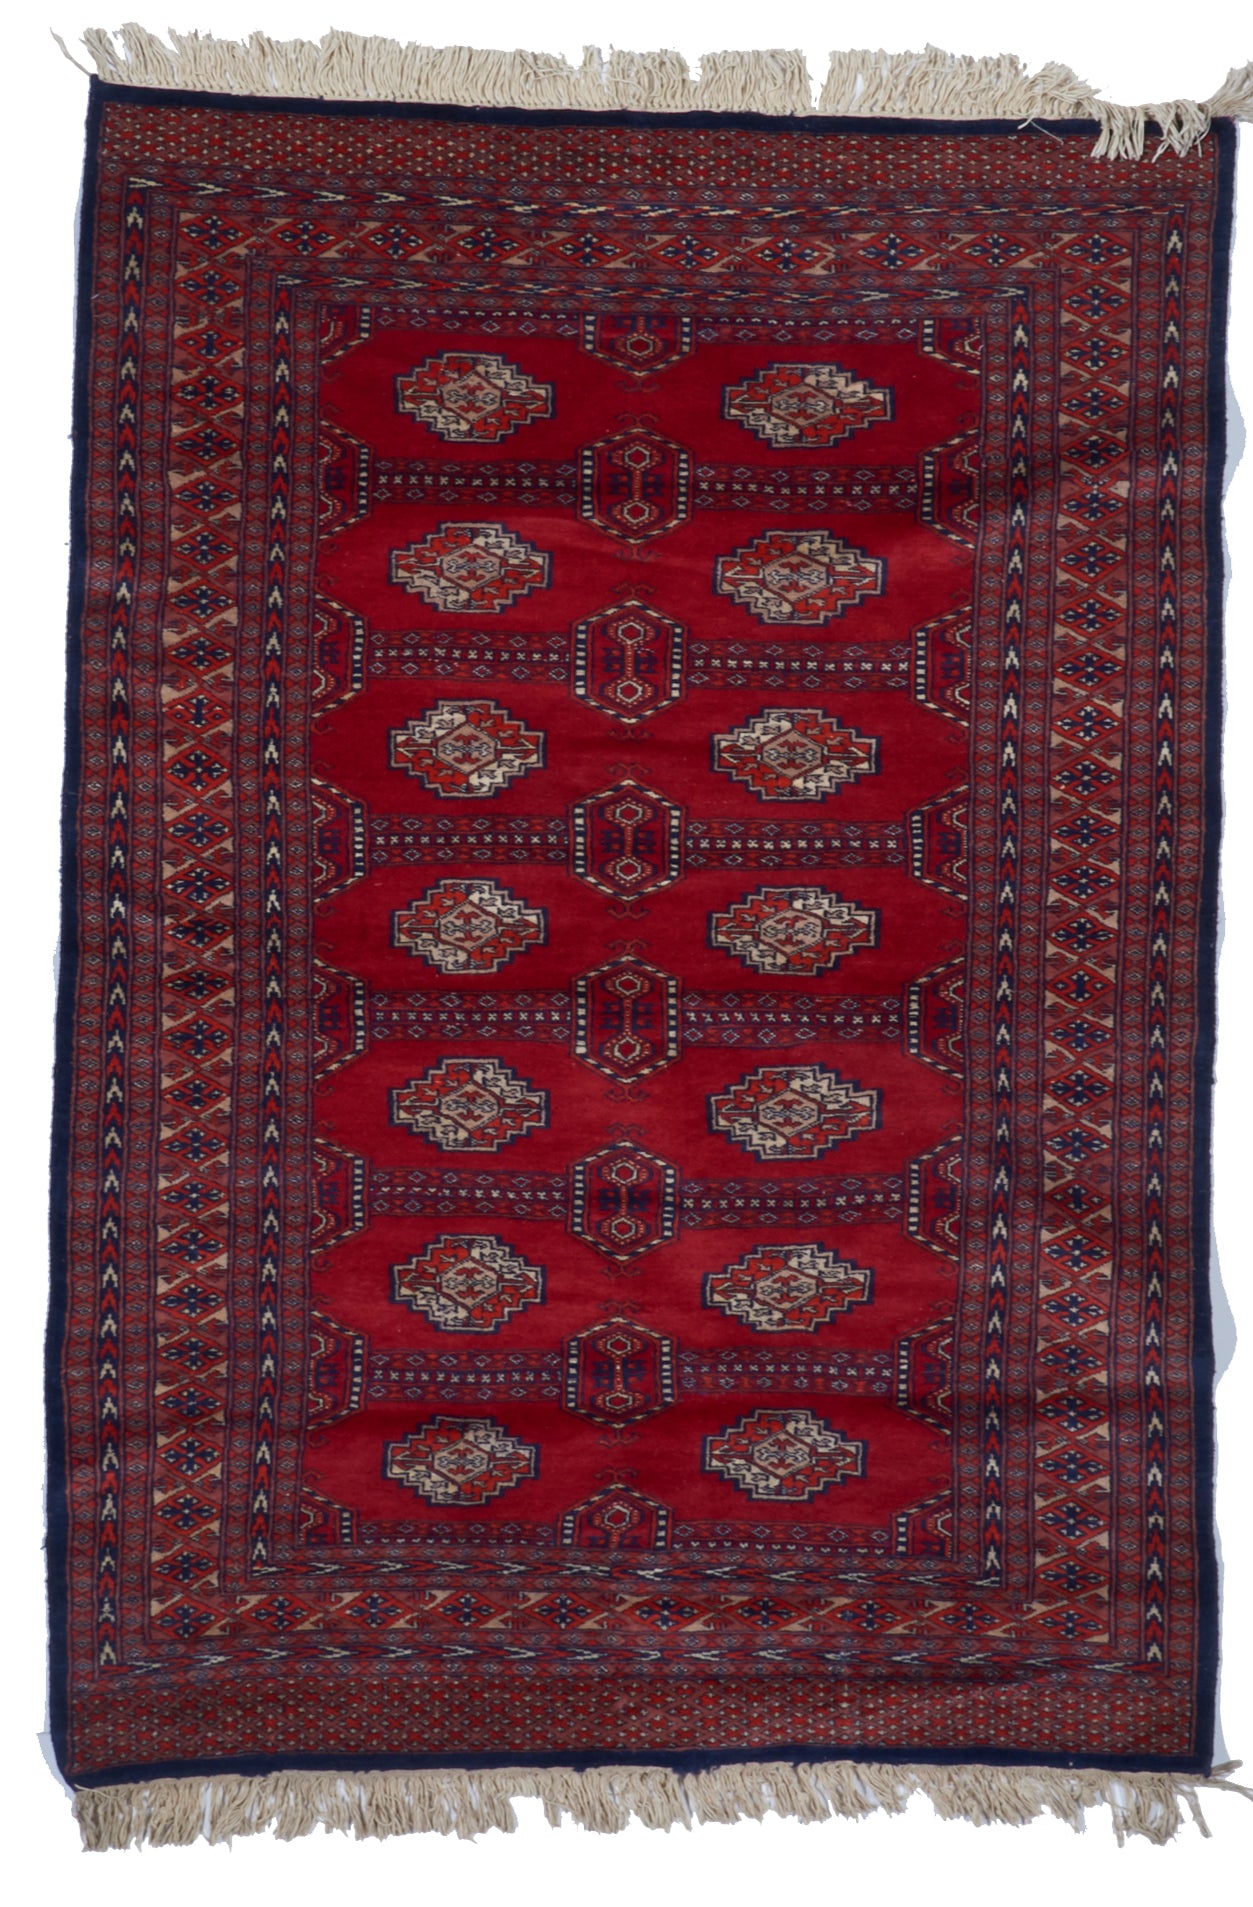 Bokhara Traditional Hand Knotted Red Wool Rug 4'3 x 6'2 - IGotYourRug